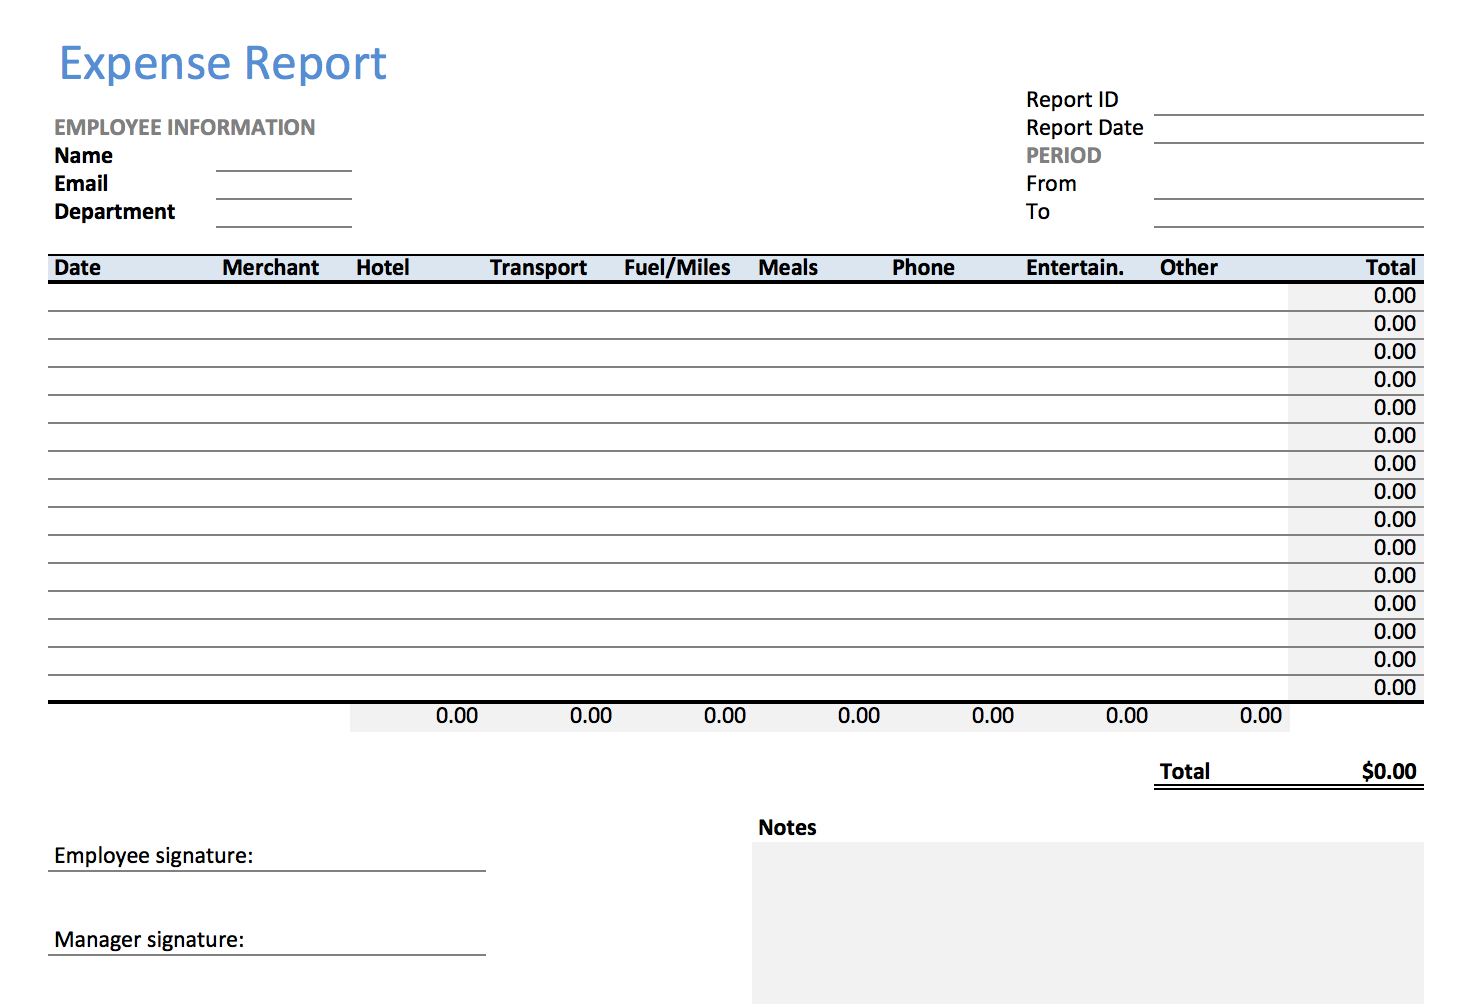 excel-expense-report-template-keepek-and-detailed-expense-report